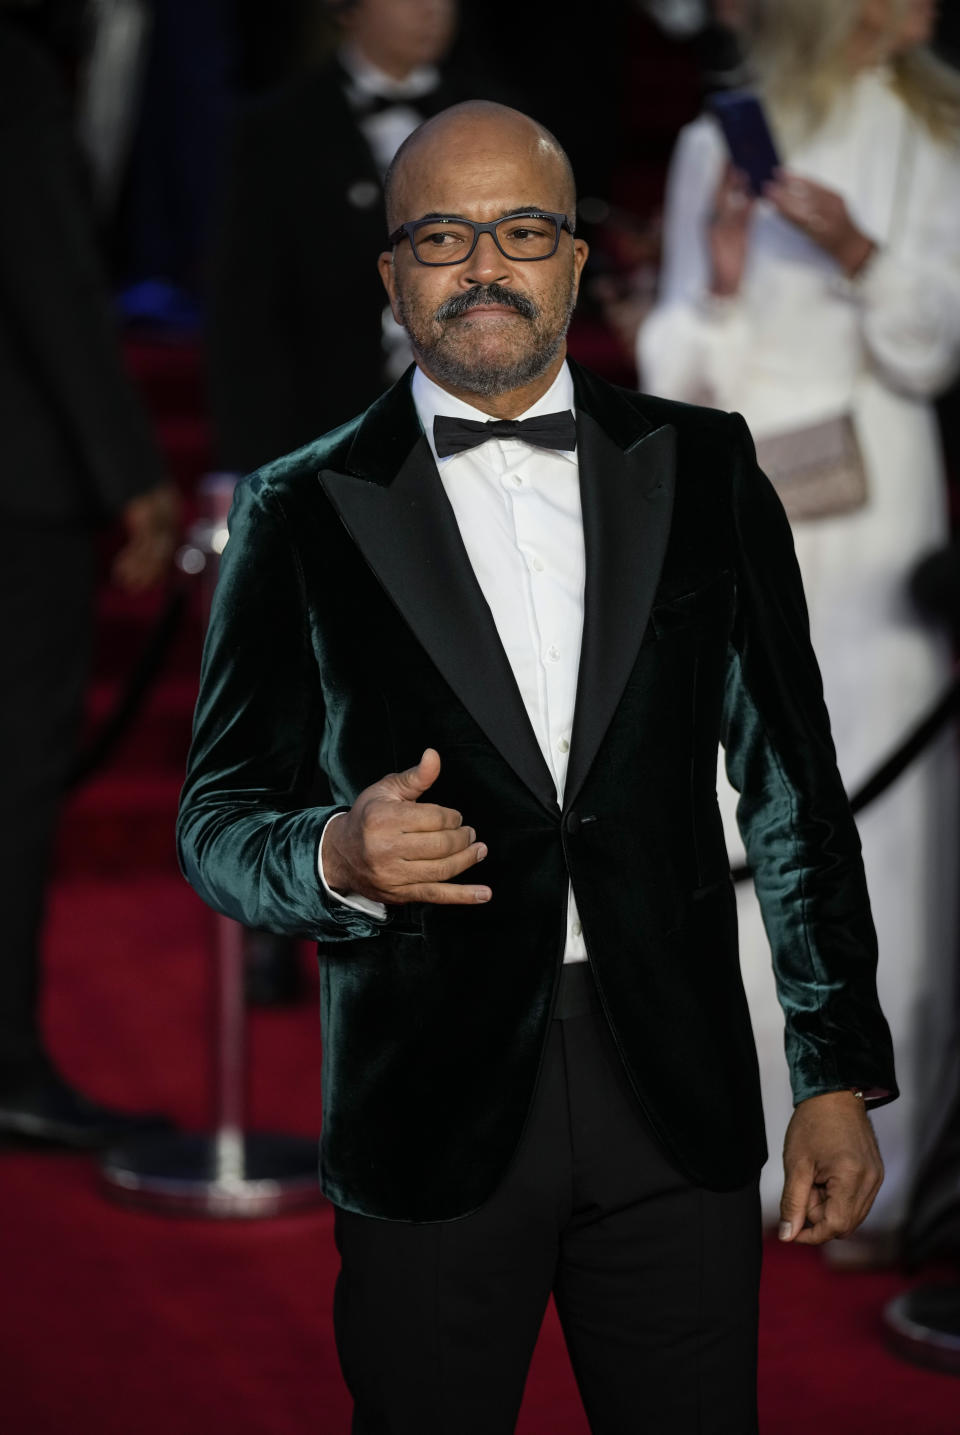 Jeffrey Wright poses for photographers upon arrival for the World premiere of the new film from the James Bond franchise 'No Time To Die', in London Tuesday, Sept. 28, 2021. (AP Photo/Matt Dunham)